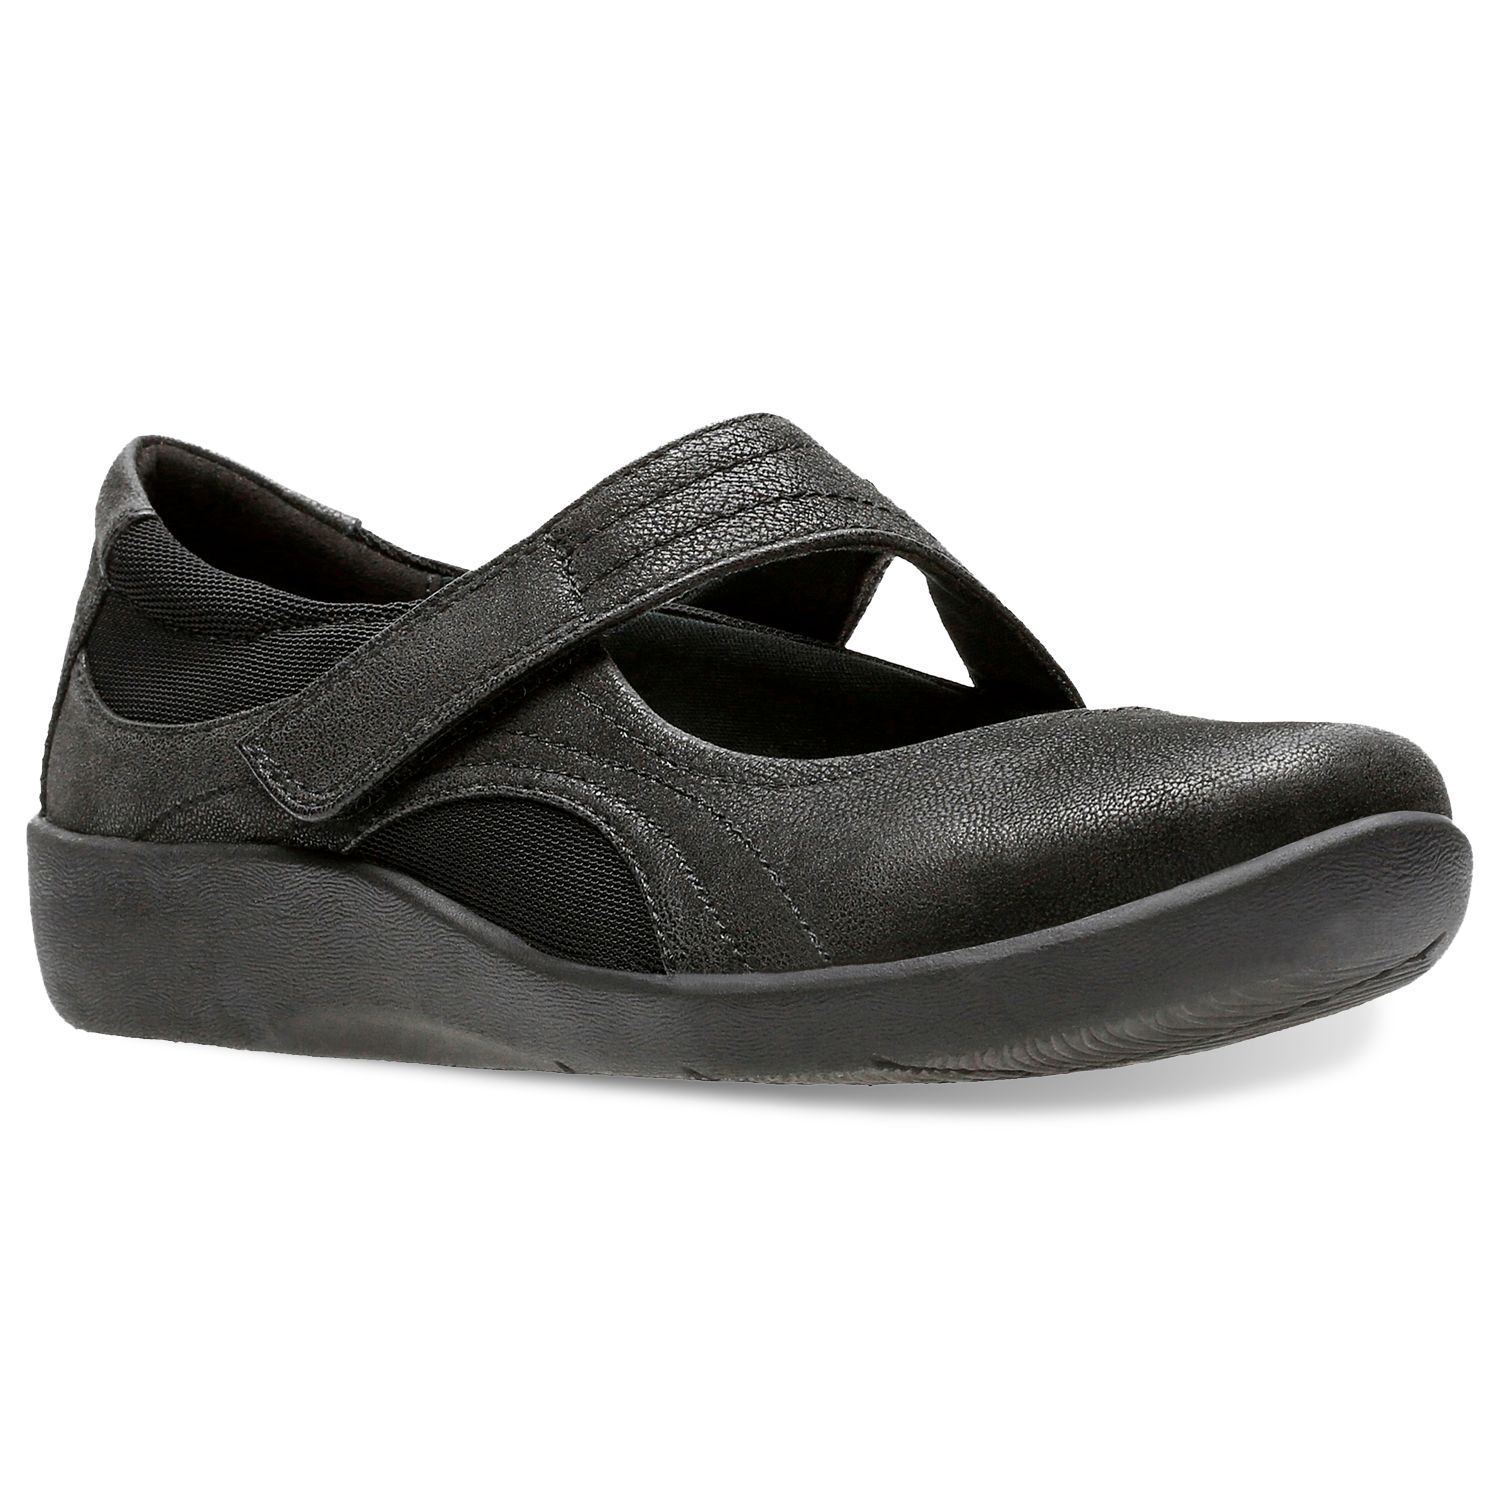 clarks womens shoes at kohls